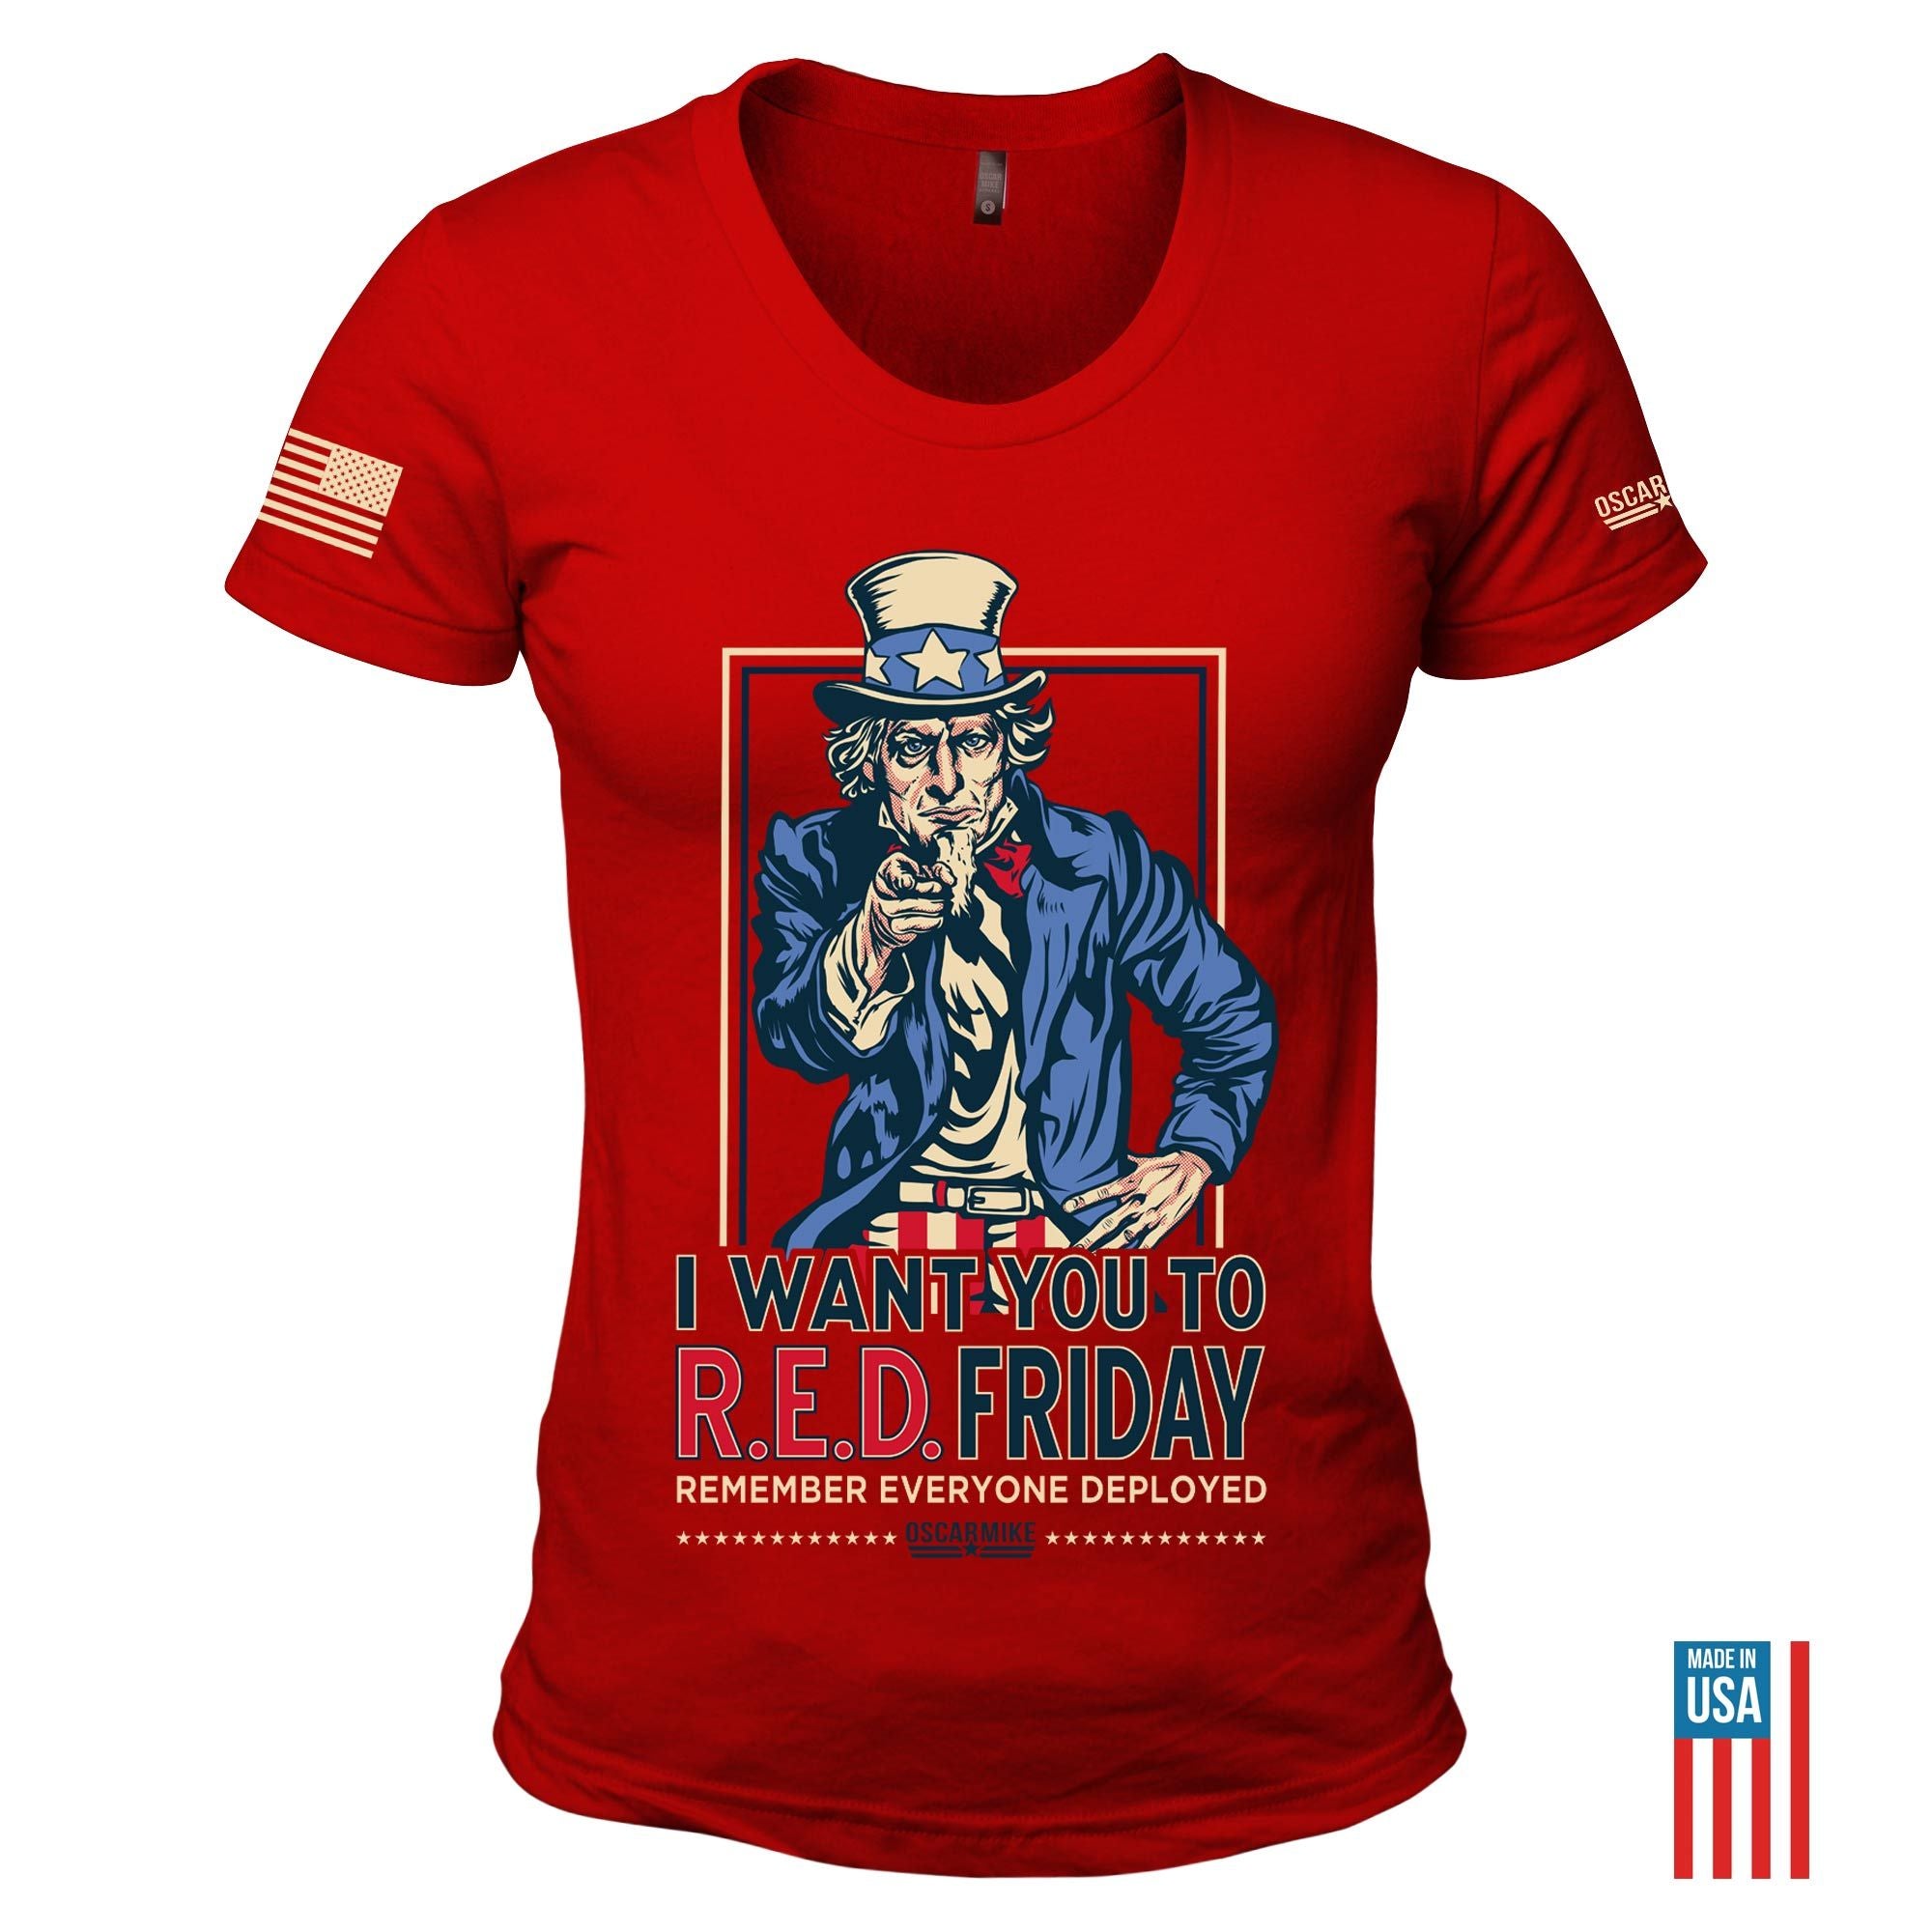 Women's R.E.D. Uncle Friday T-Shirt from Oscar Mike Apparel